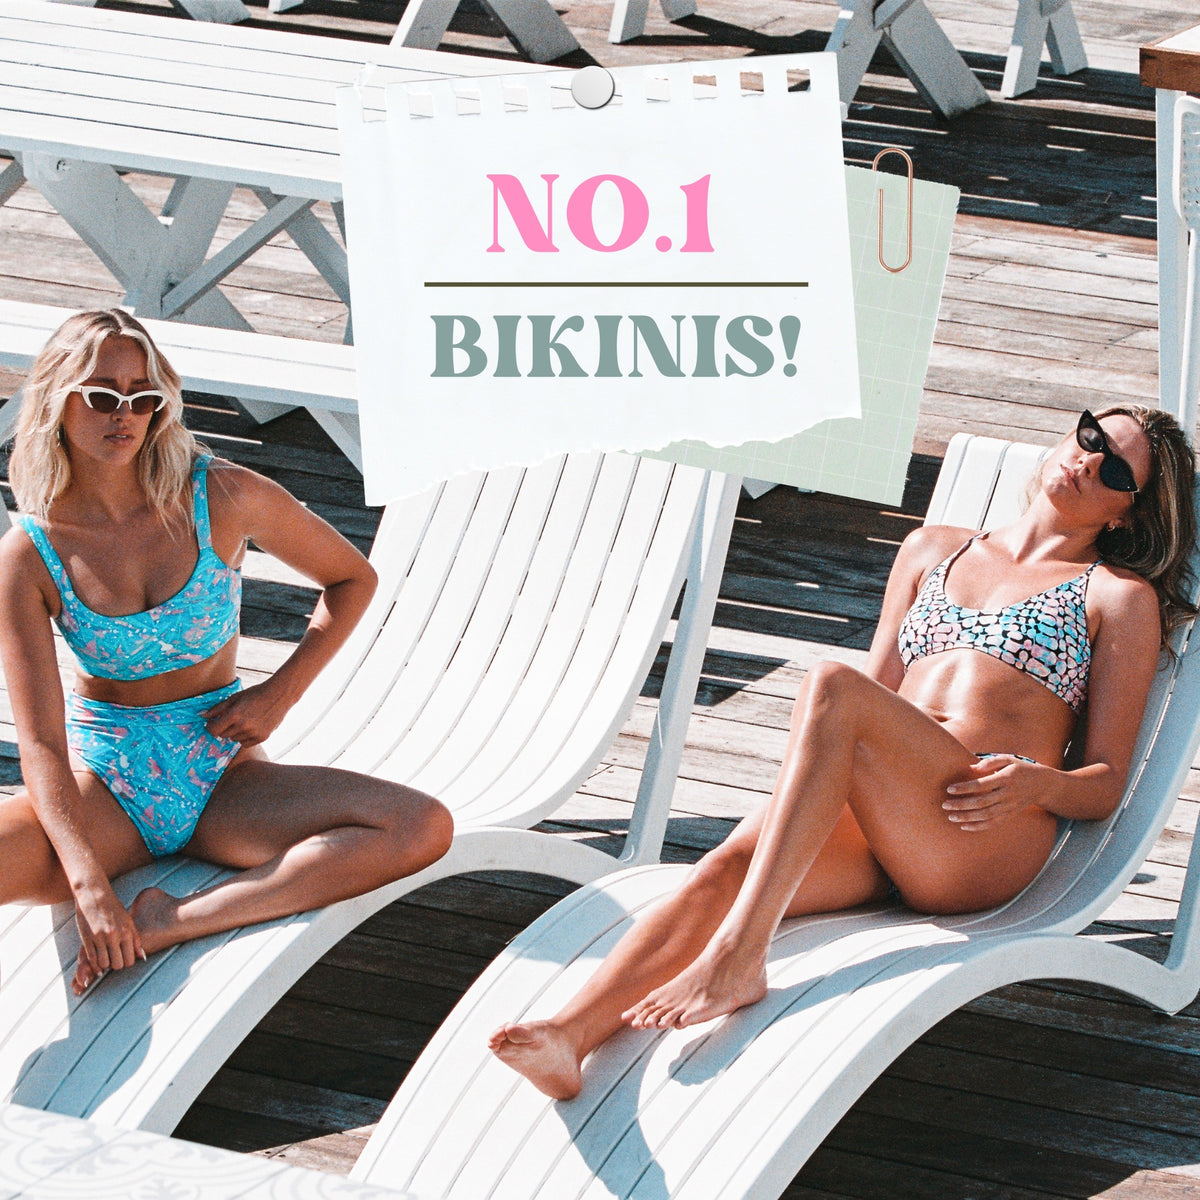 Tide and Seek sustainable swimwear What to pack for a trip to Ibiza blog post - item 1 bikinis! Two models lounge on sunbed next to a pool enjoying the sunshine in Tide and Seek bikinis.